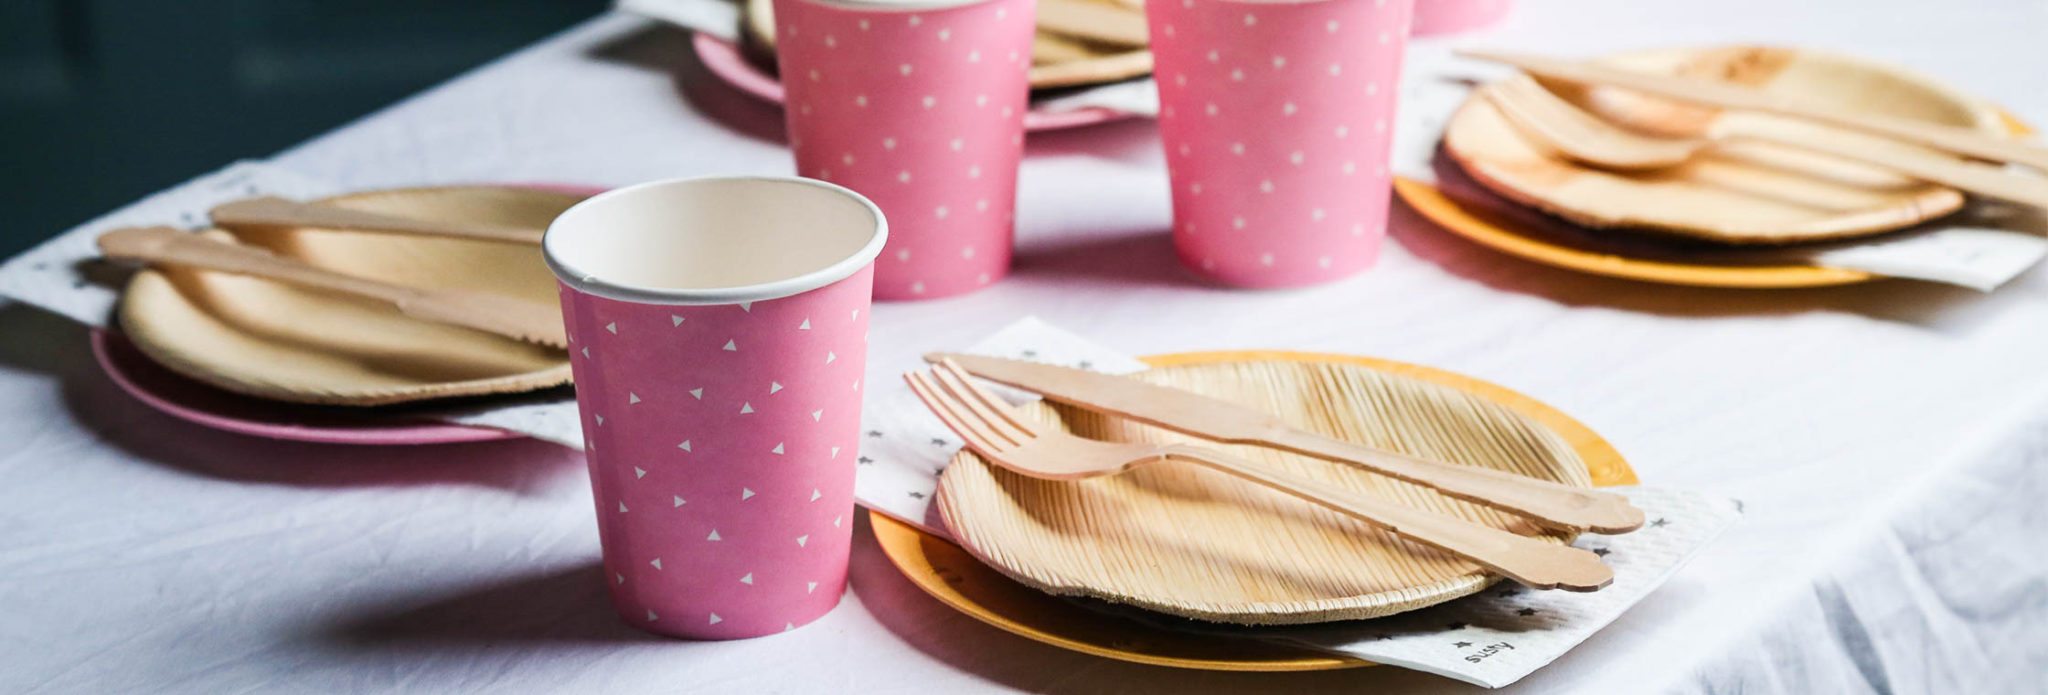 Susty Party makes compostable partyware that’s beautiful and sophisticated. 